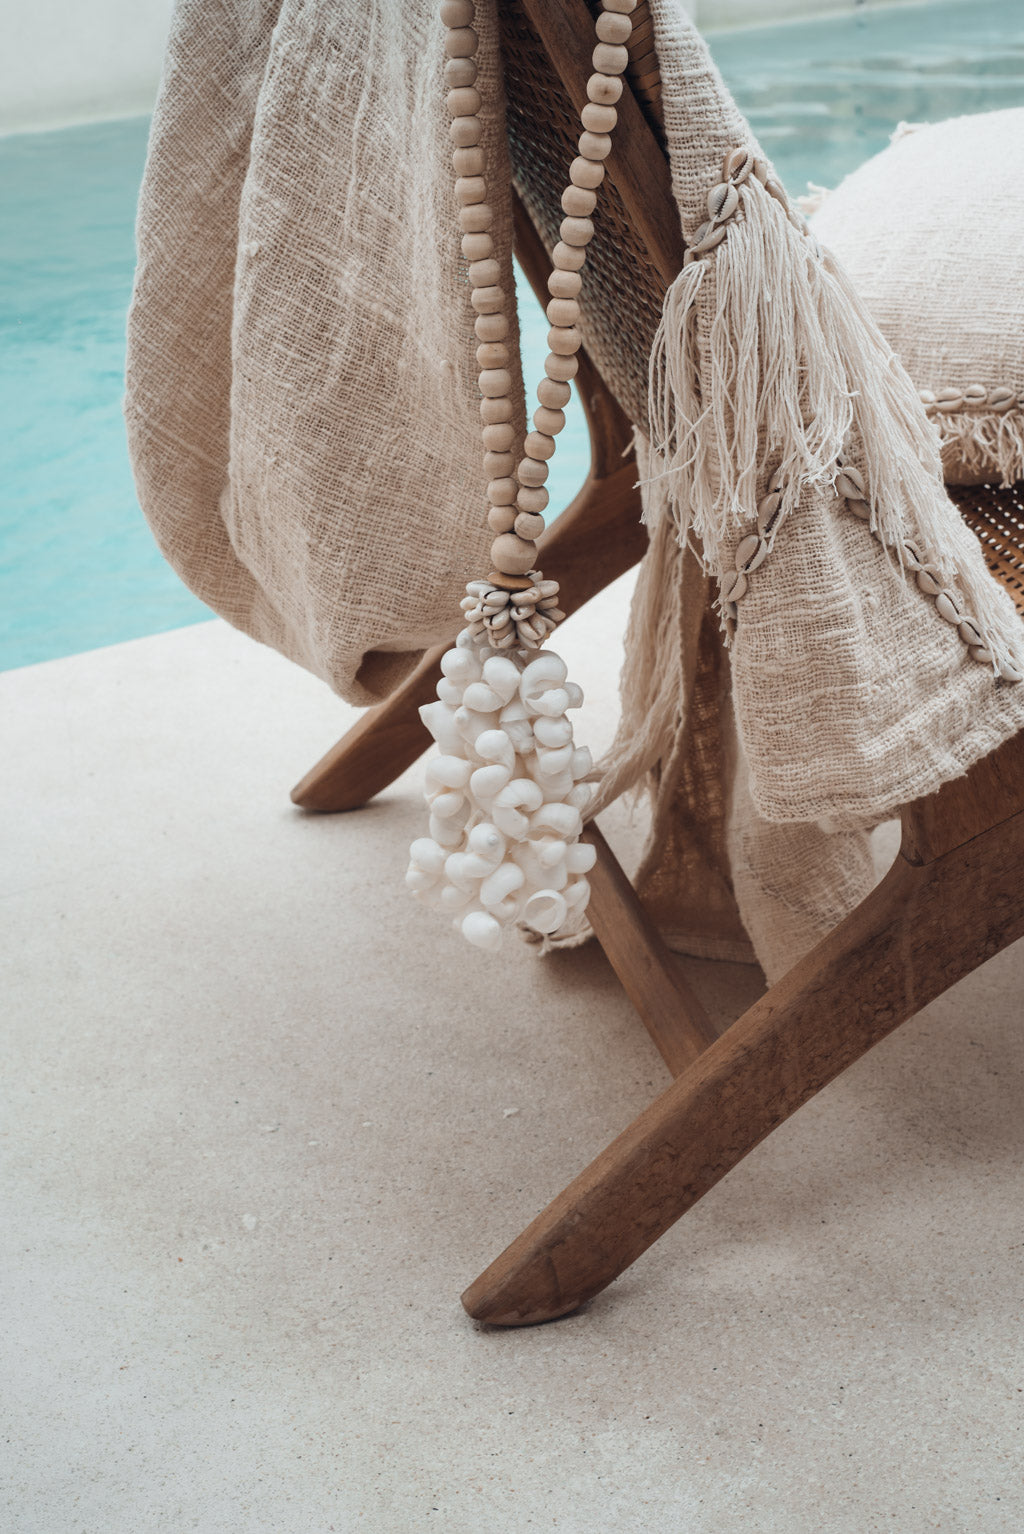 Balinese suspension in wooden beads and white shells